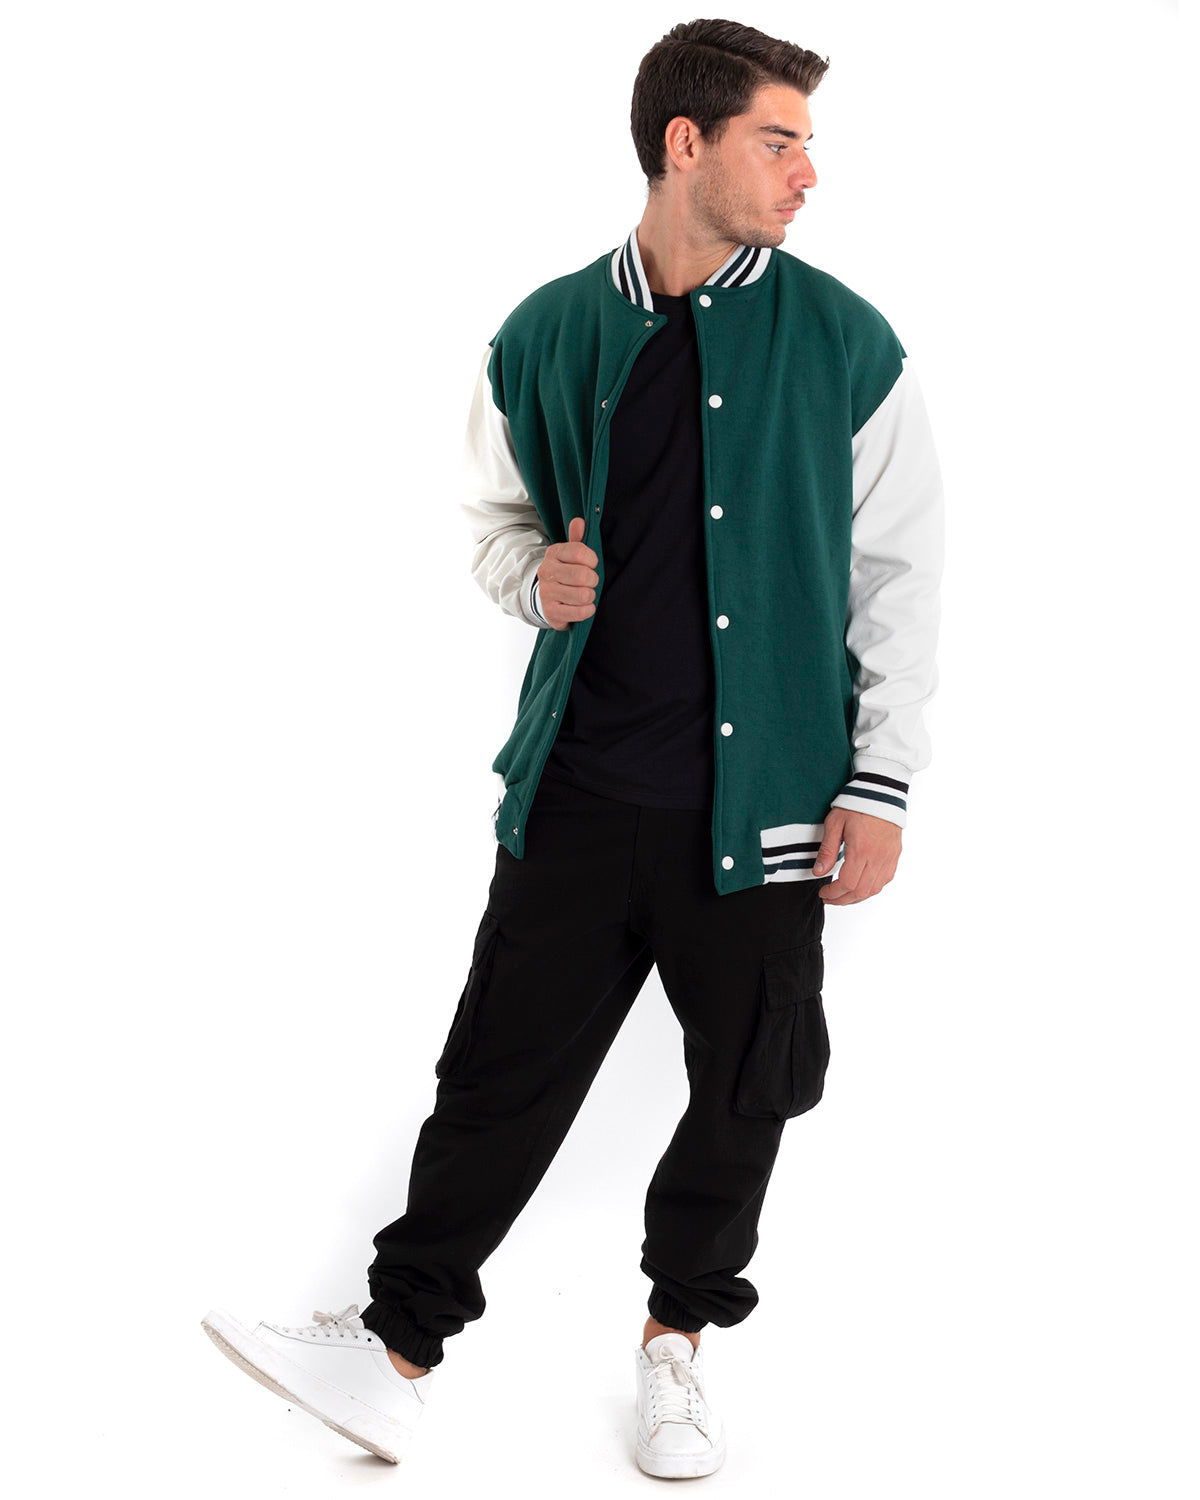 Men's College Varsity Jacket with Faux Leather Sleeves Two-Tone Green White GIOSAL